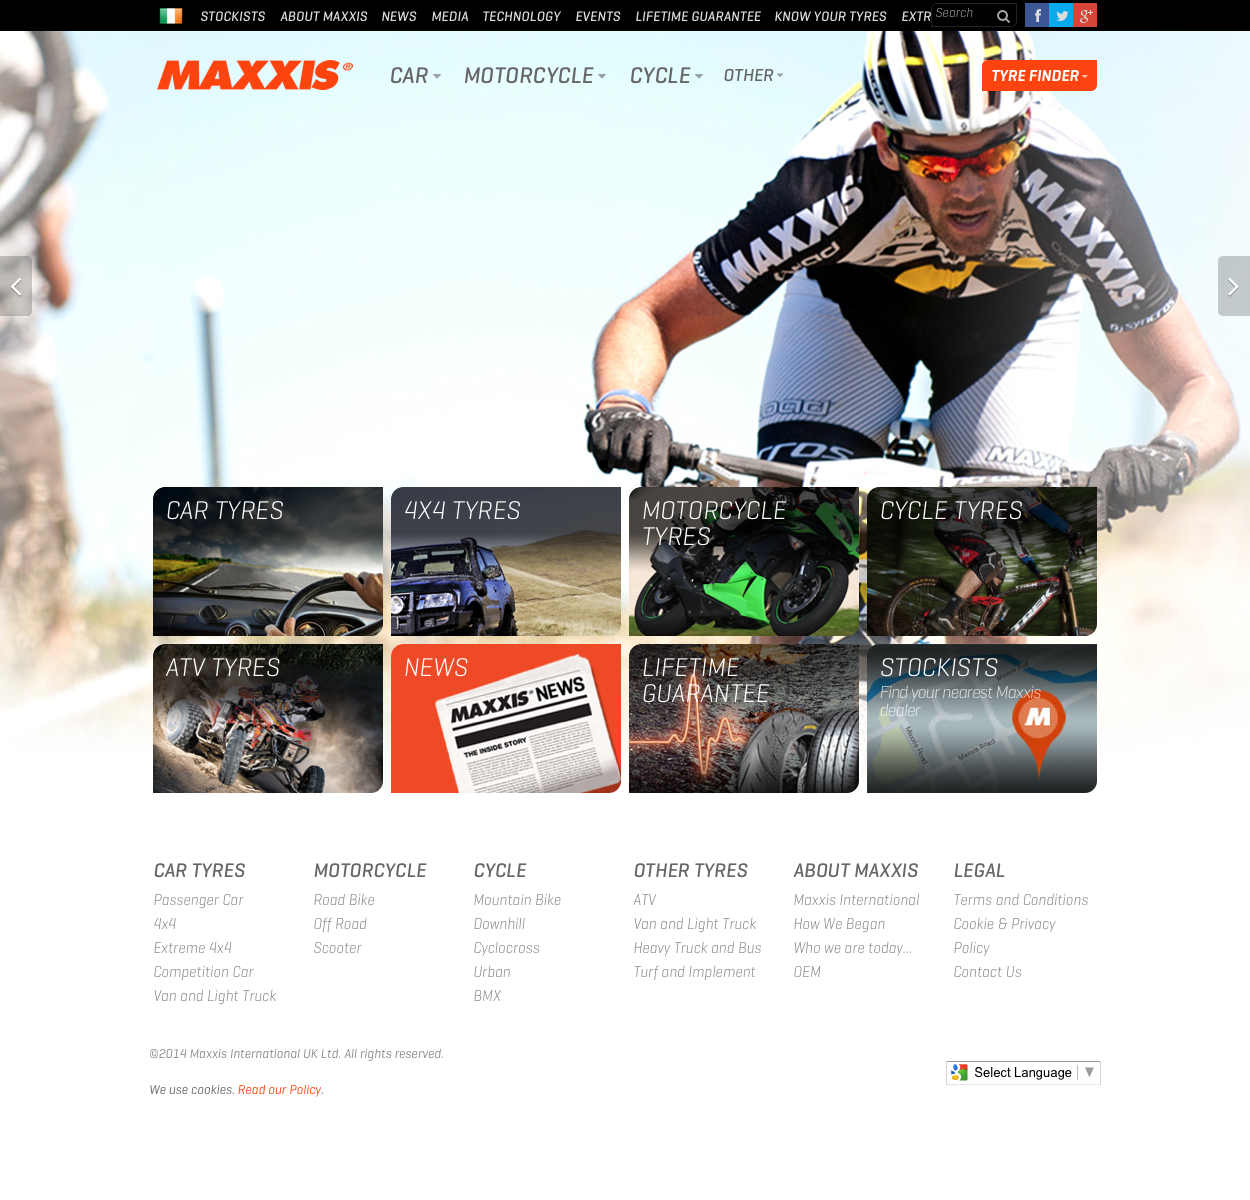 Maxxis Aims to Make Irish Eyes Smile with New Website